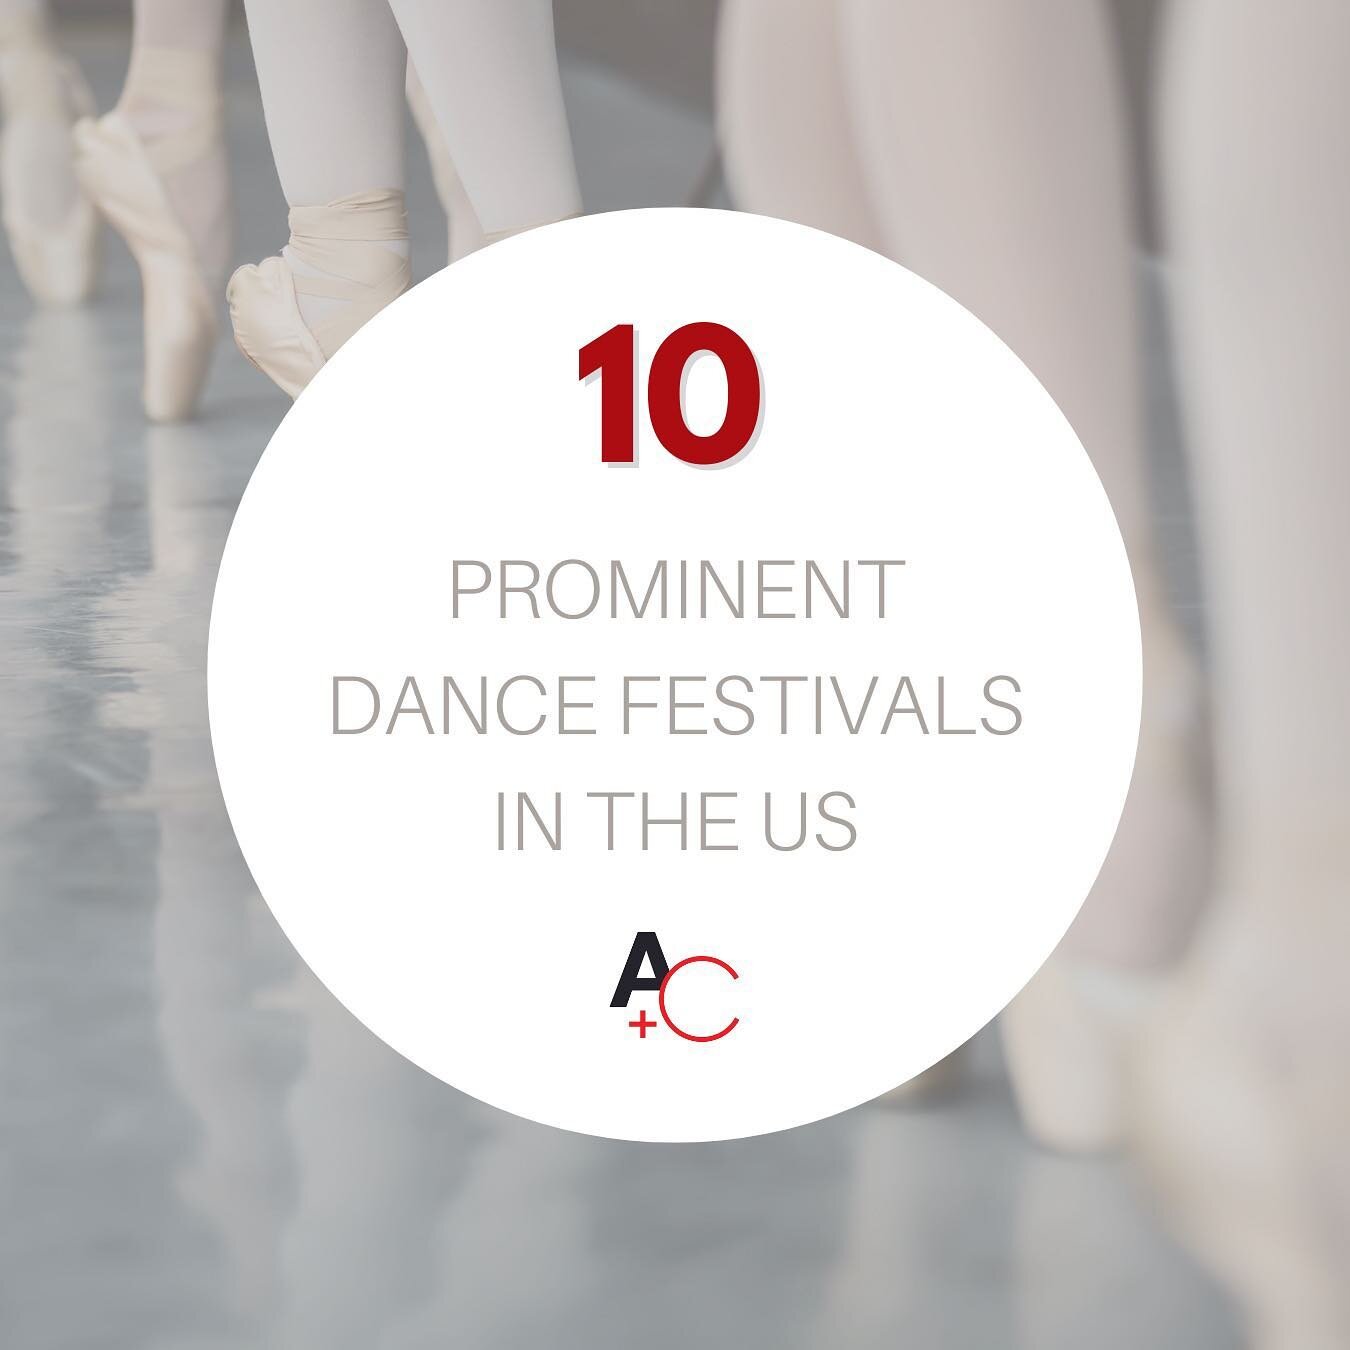 Here are 10 prominent dance festivals in the US that you should know about!

@nydancefestival 
@atdforg 
@wakeforestdance 
@kahulapiko 
@bam_brooklyn 
@nycitycenter 
@jacobspillow 
@sfhiphopdancefest 
@worldsalsafest 
@kathakfestival 

#dance #dancef